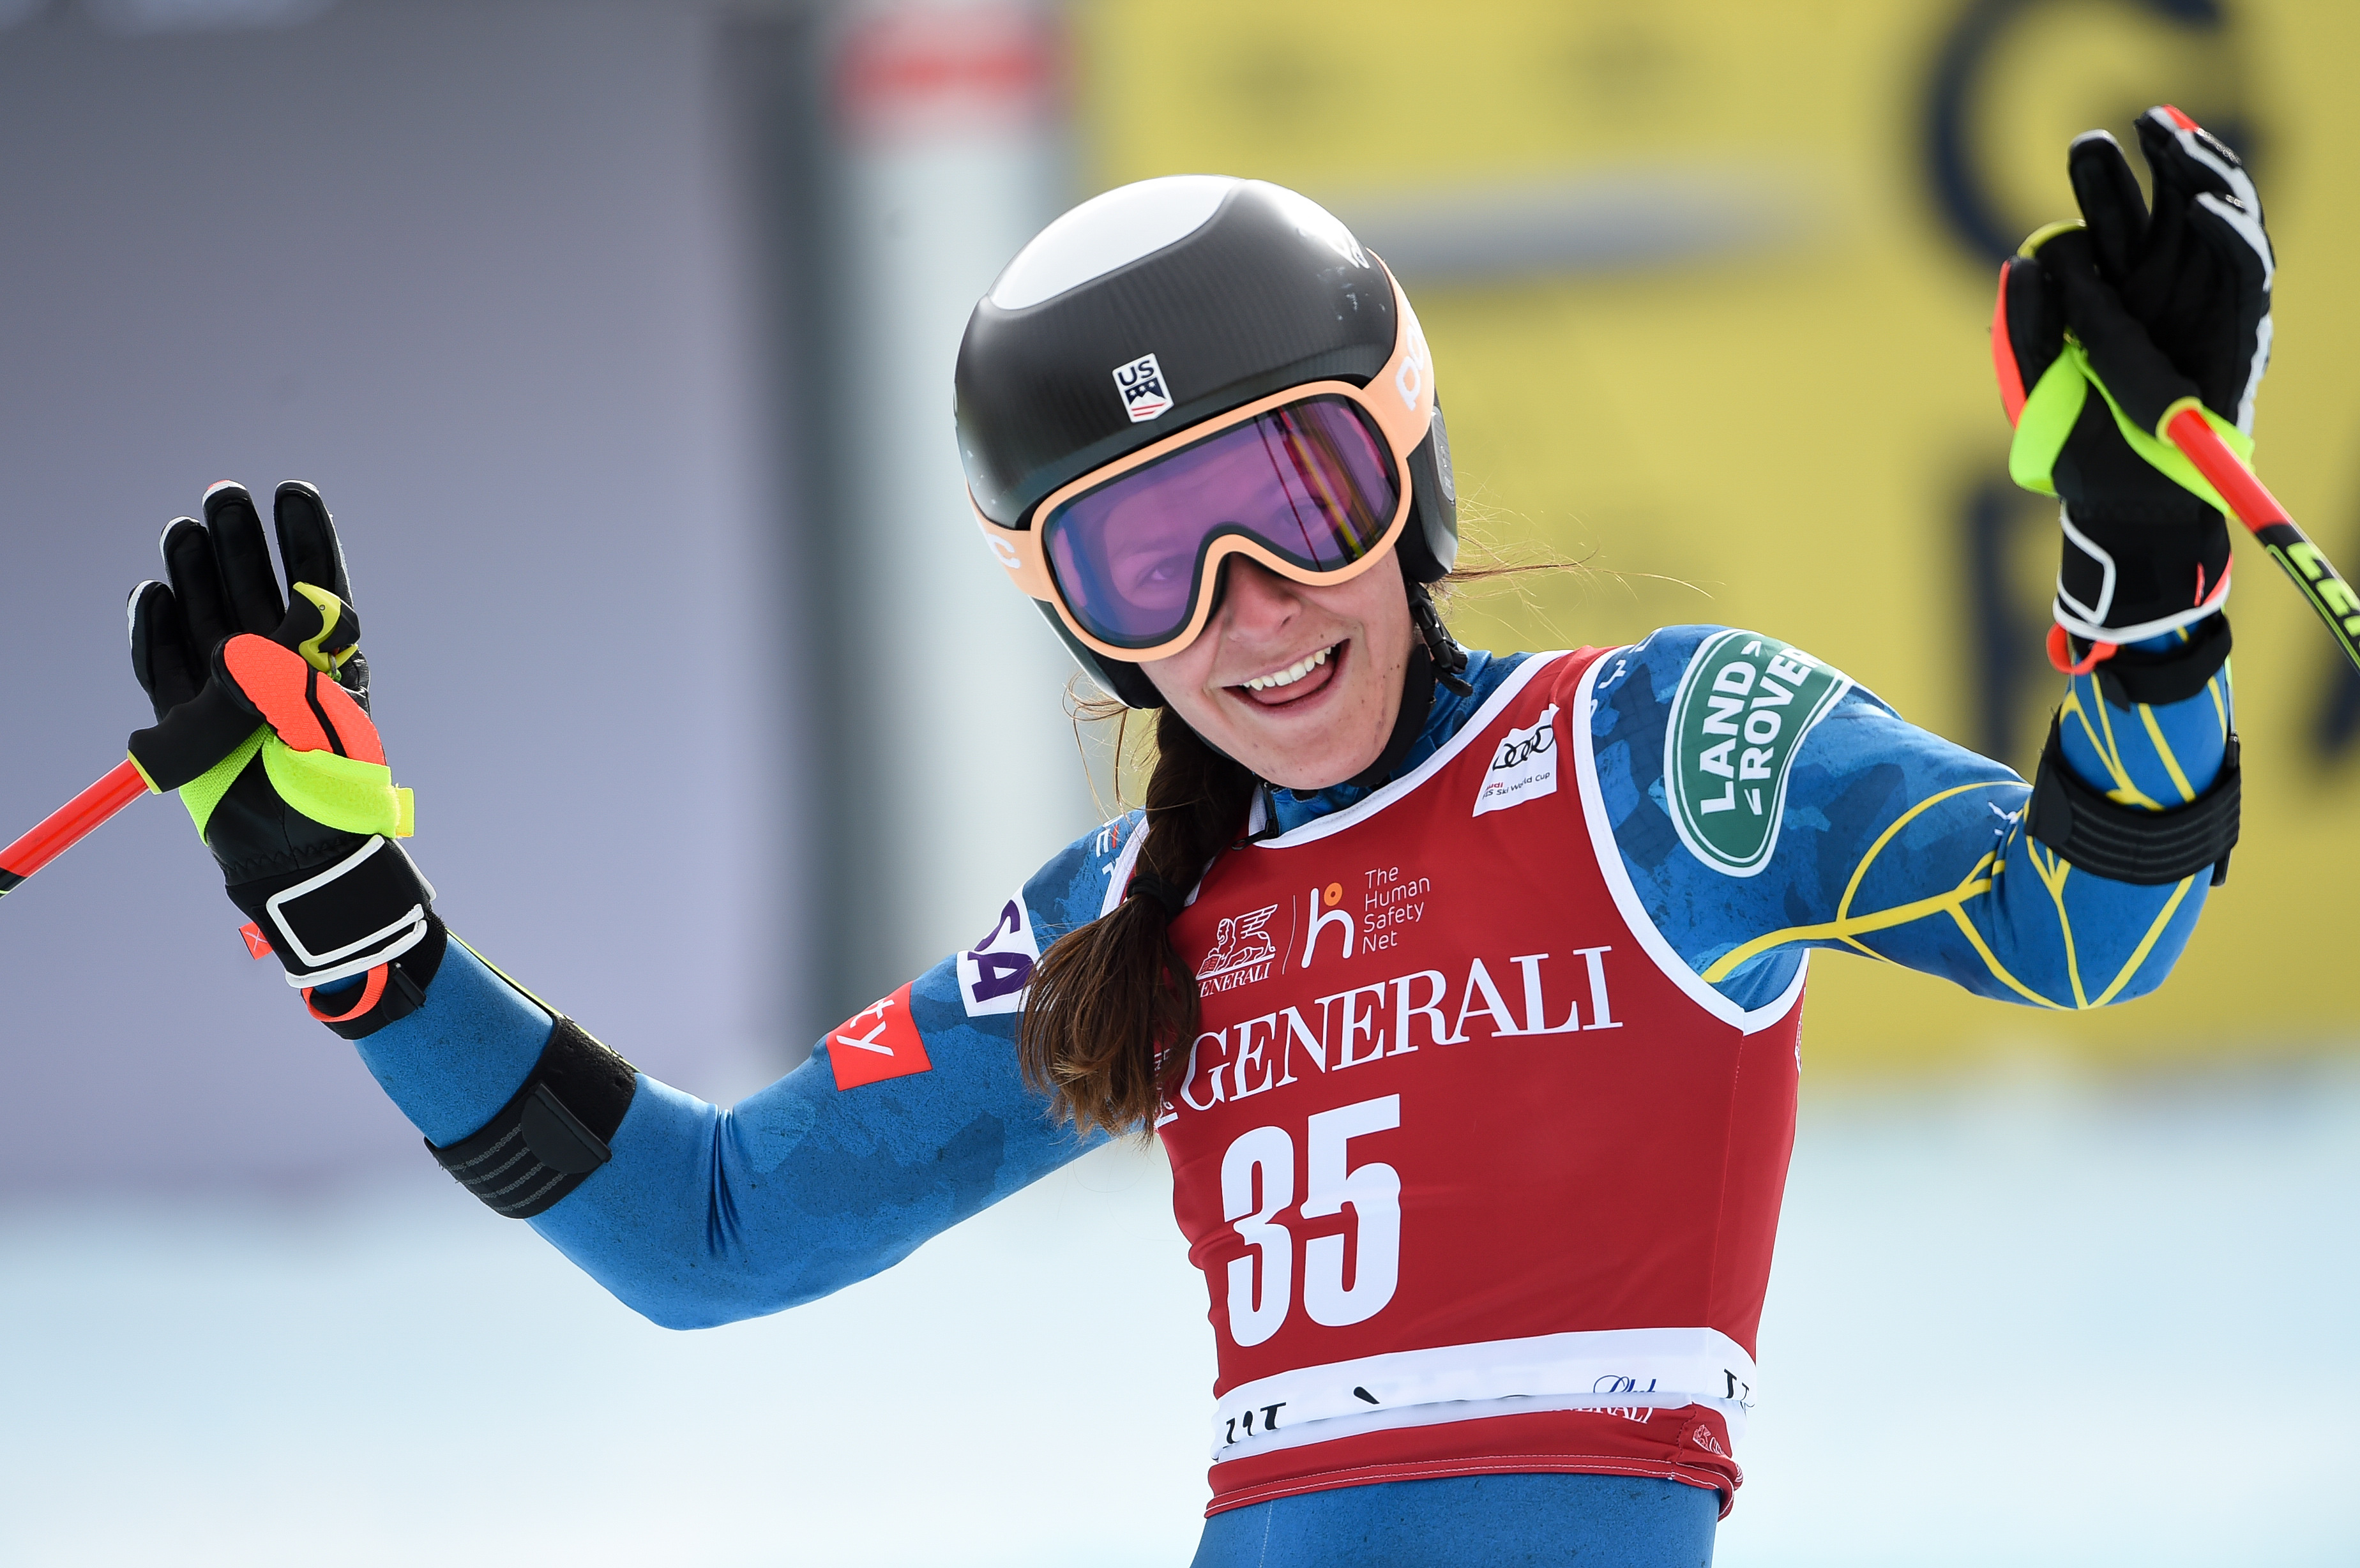 Career-First Top 10 for Cashman in Val d'Isere Super-G